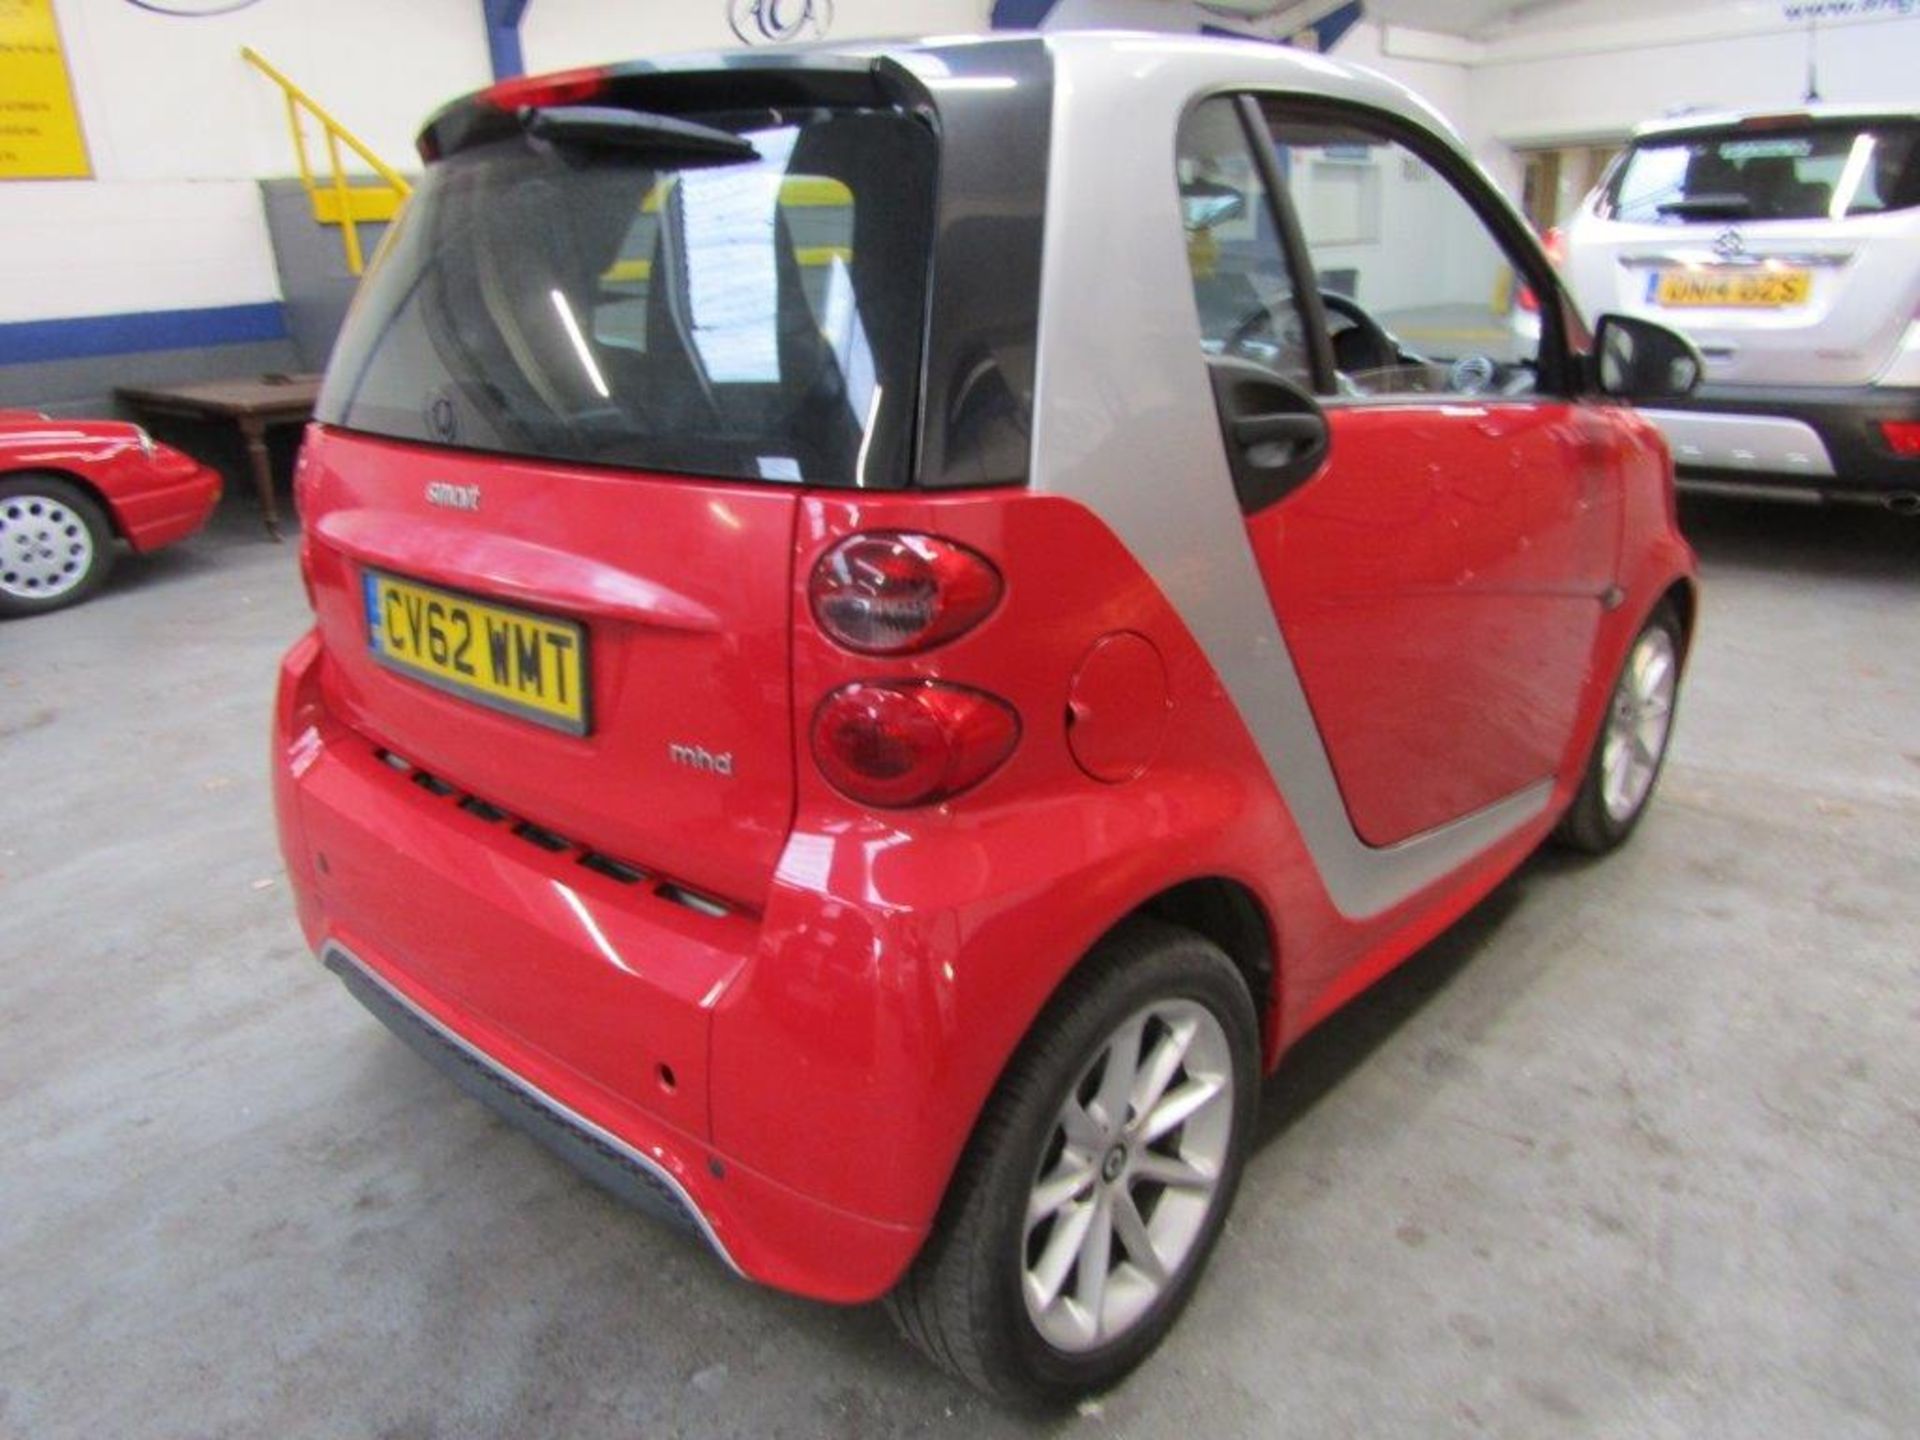 62 12 Smart Fortwo Passion Auto - Image 18 of 18